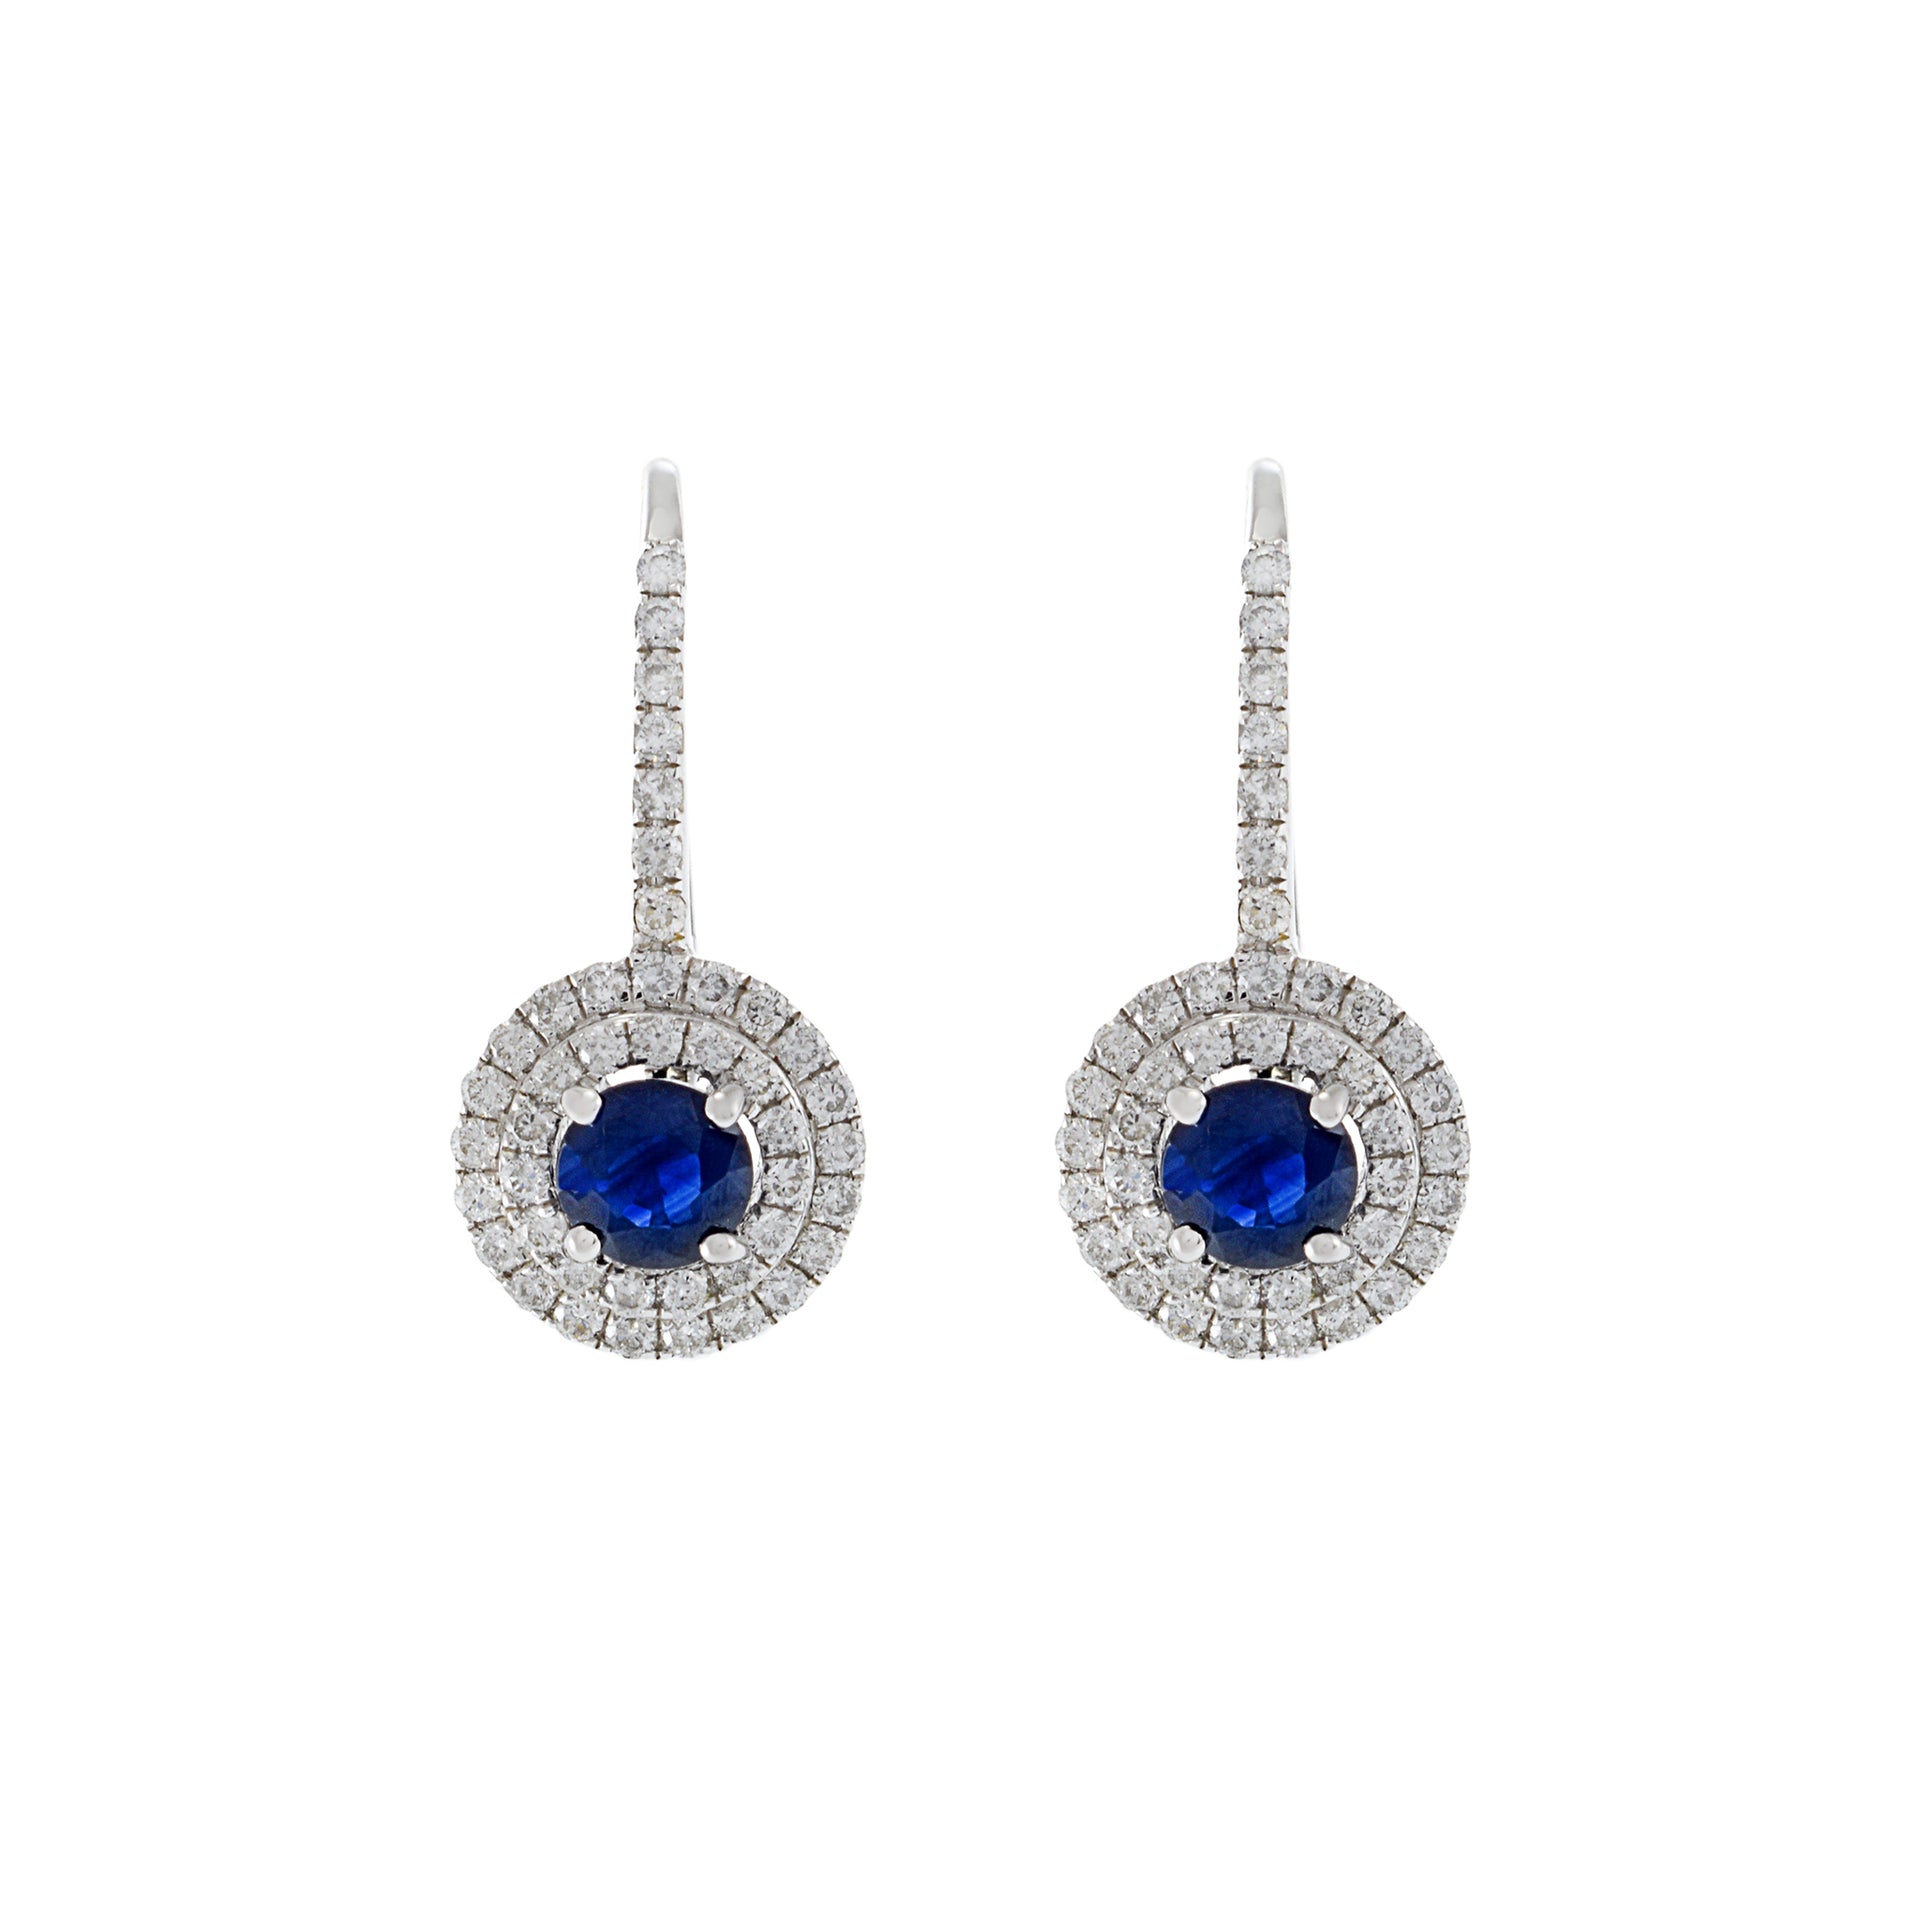 18KT White Gold Diamond And Sapphire Circle Drop Earrings